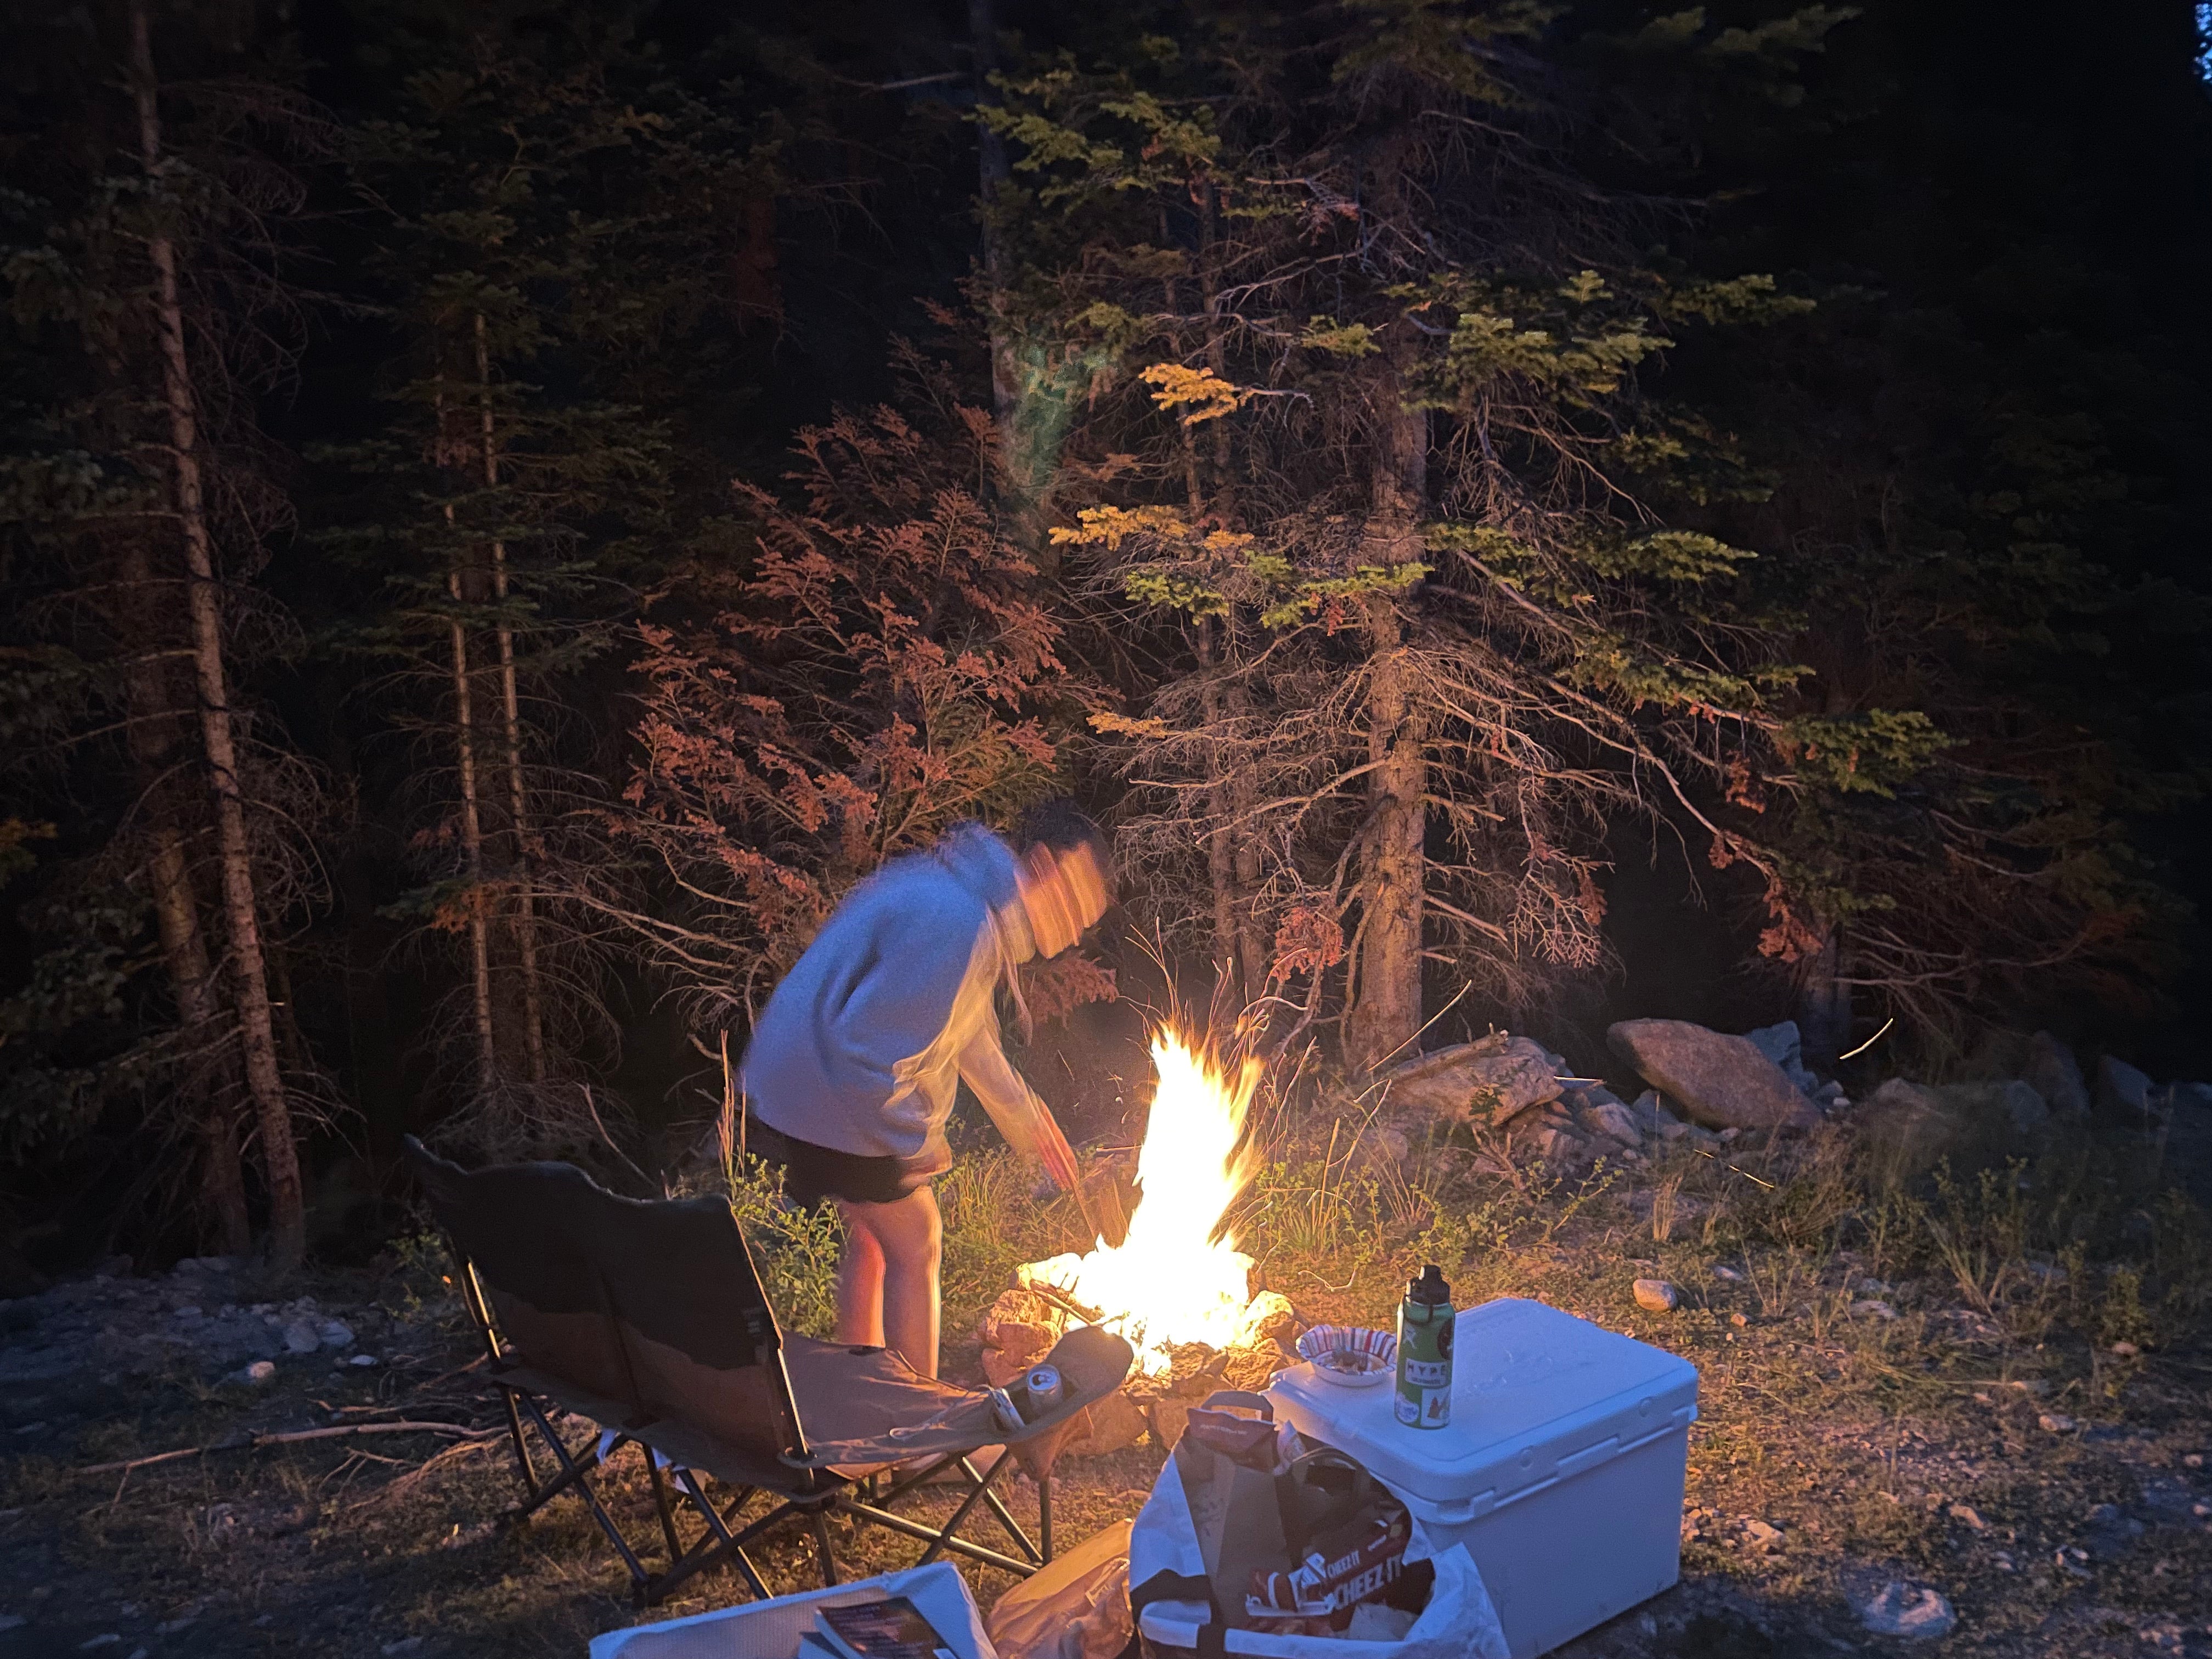 Camper submitted image from Allenspark Dispersed Camping - 1